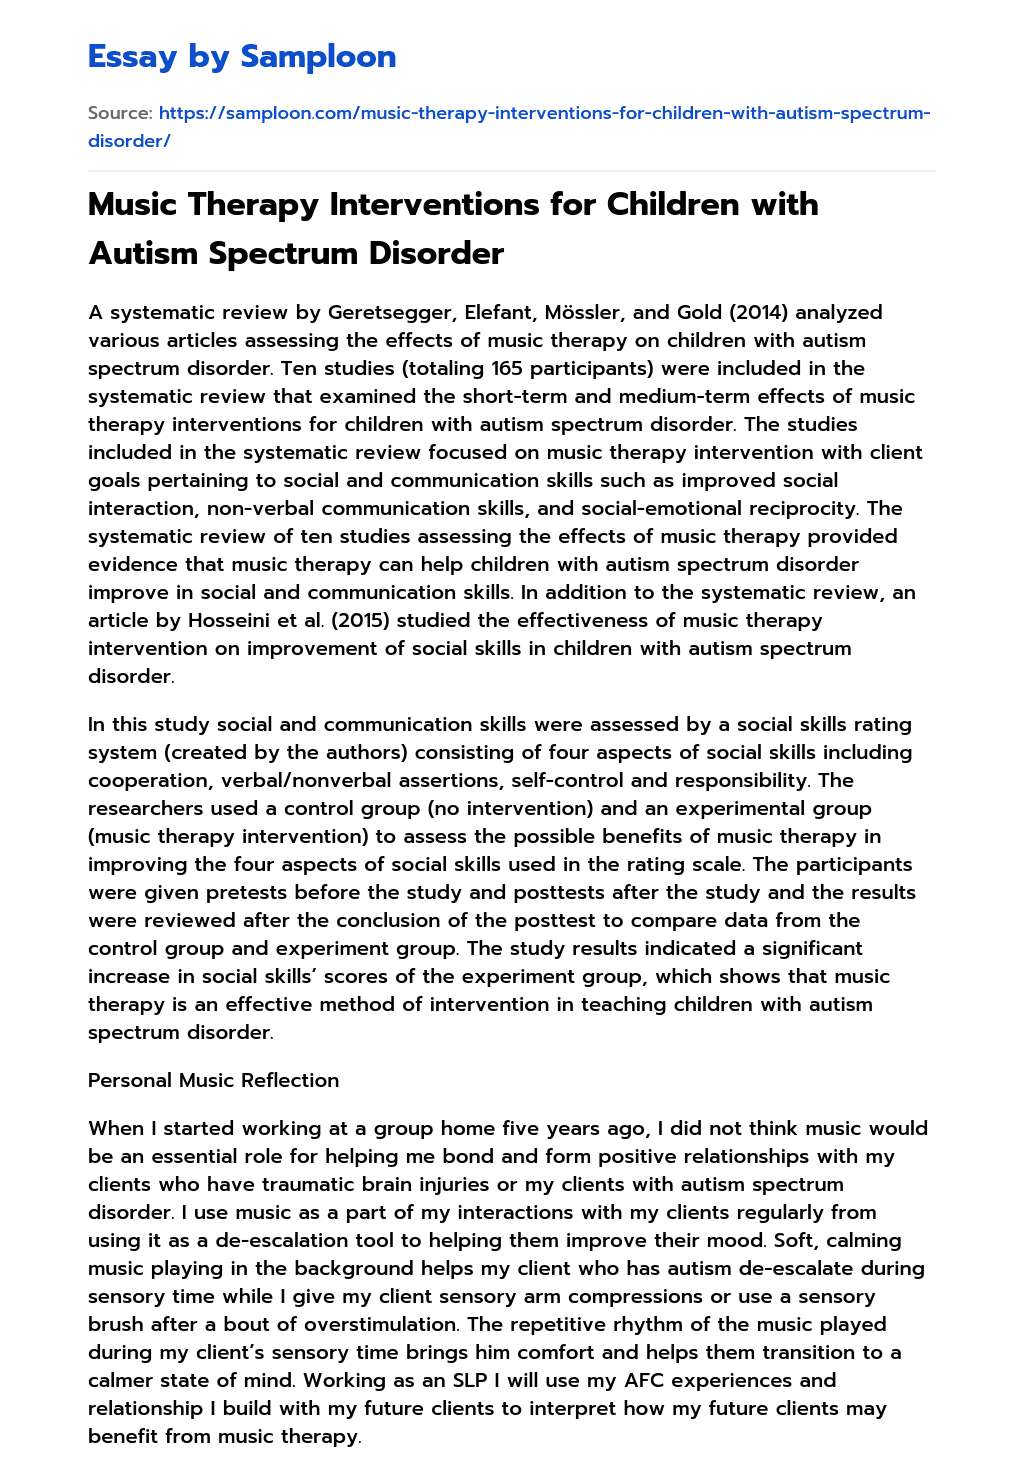 music-therapy-interventions-for-children-with-autism-spectrum